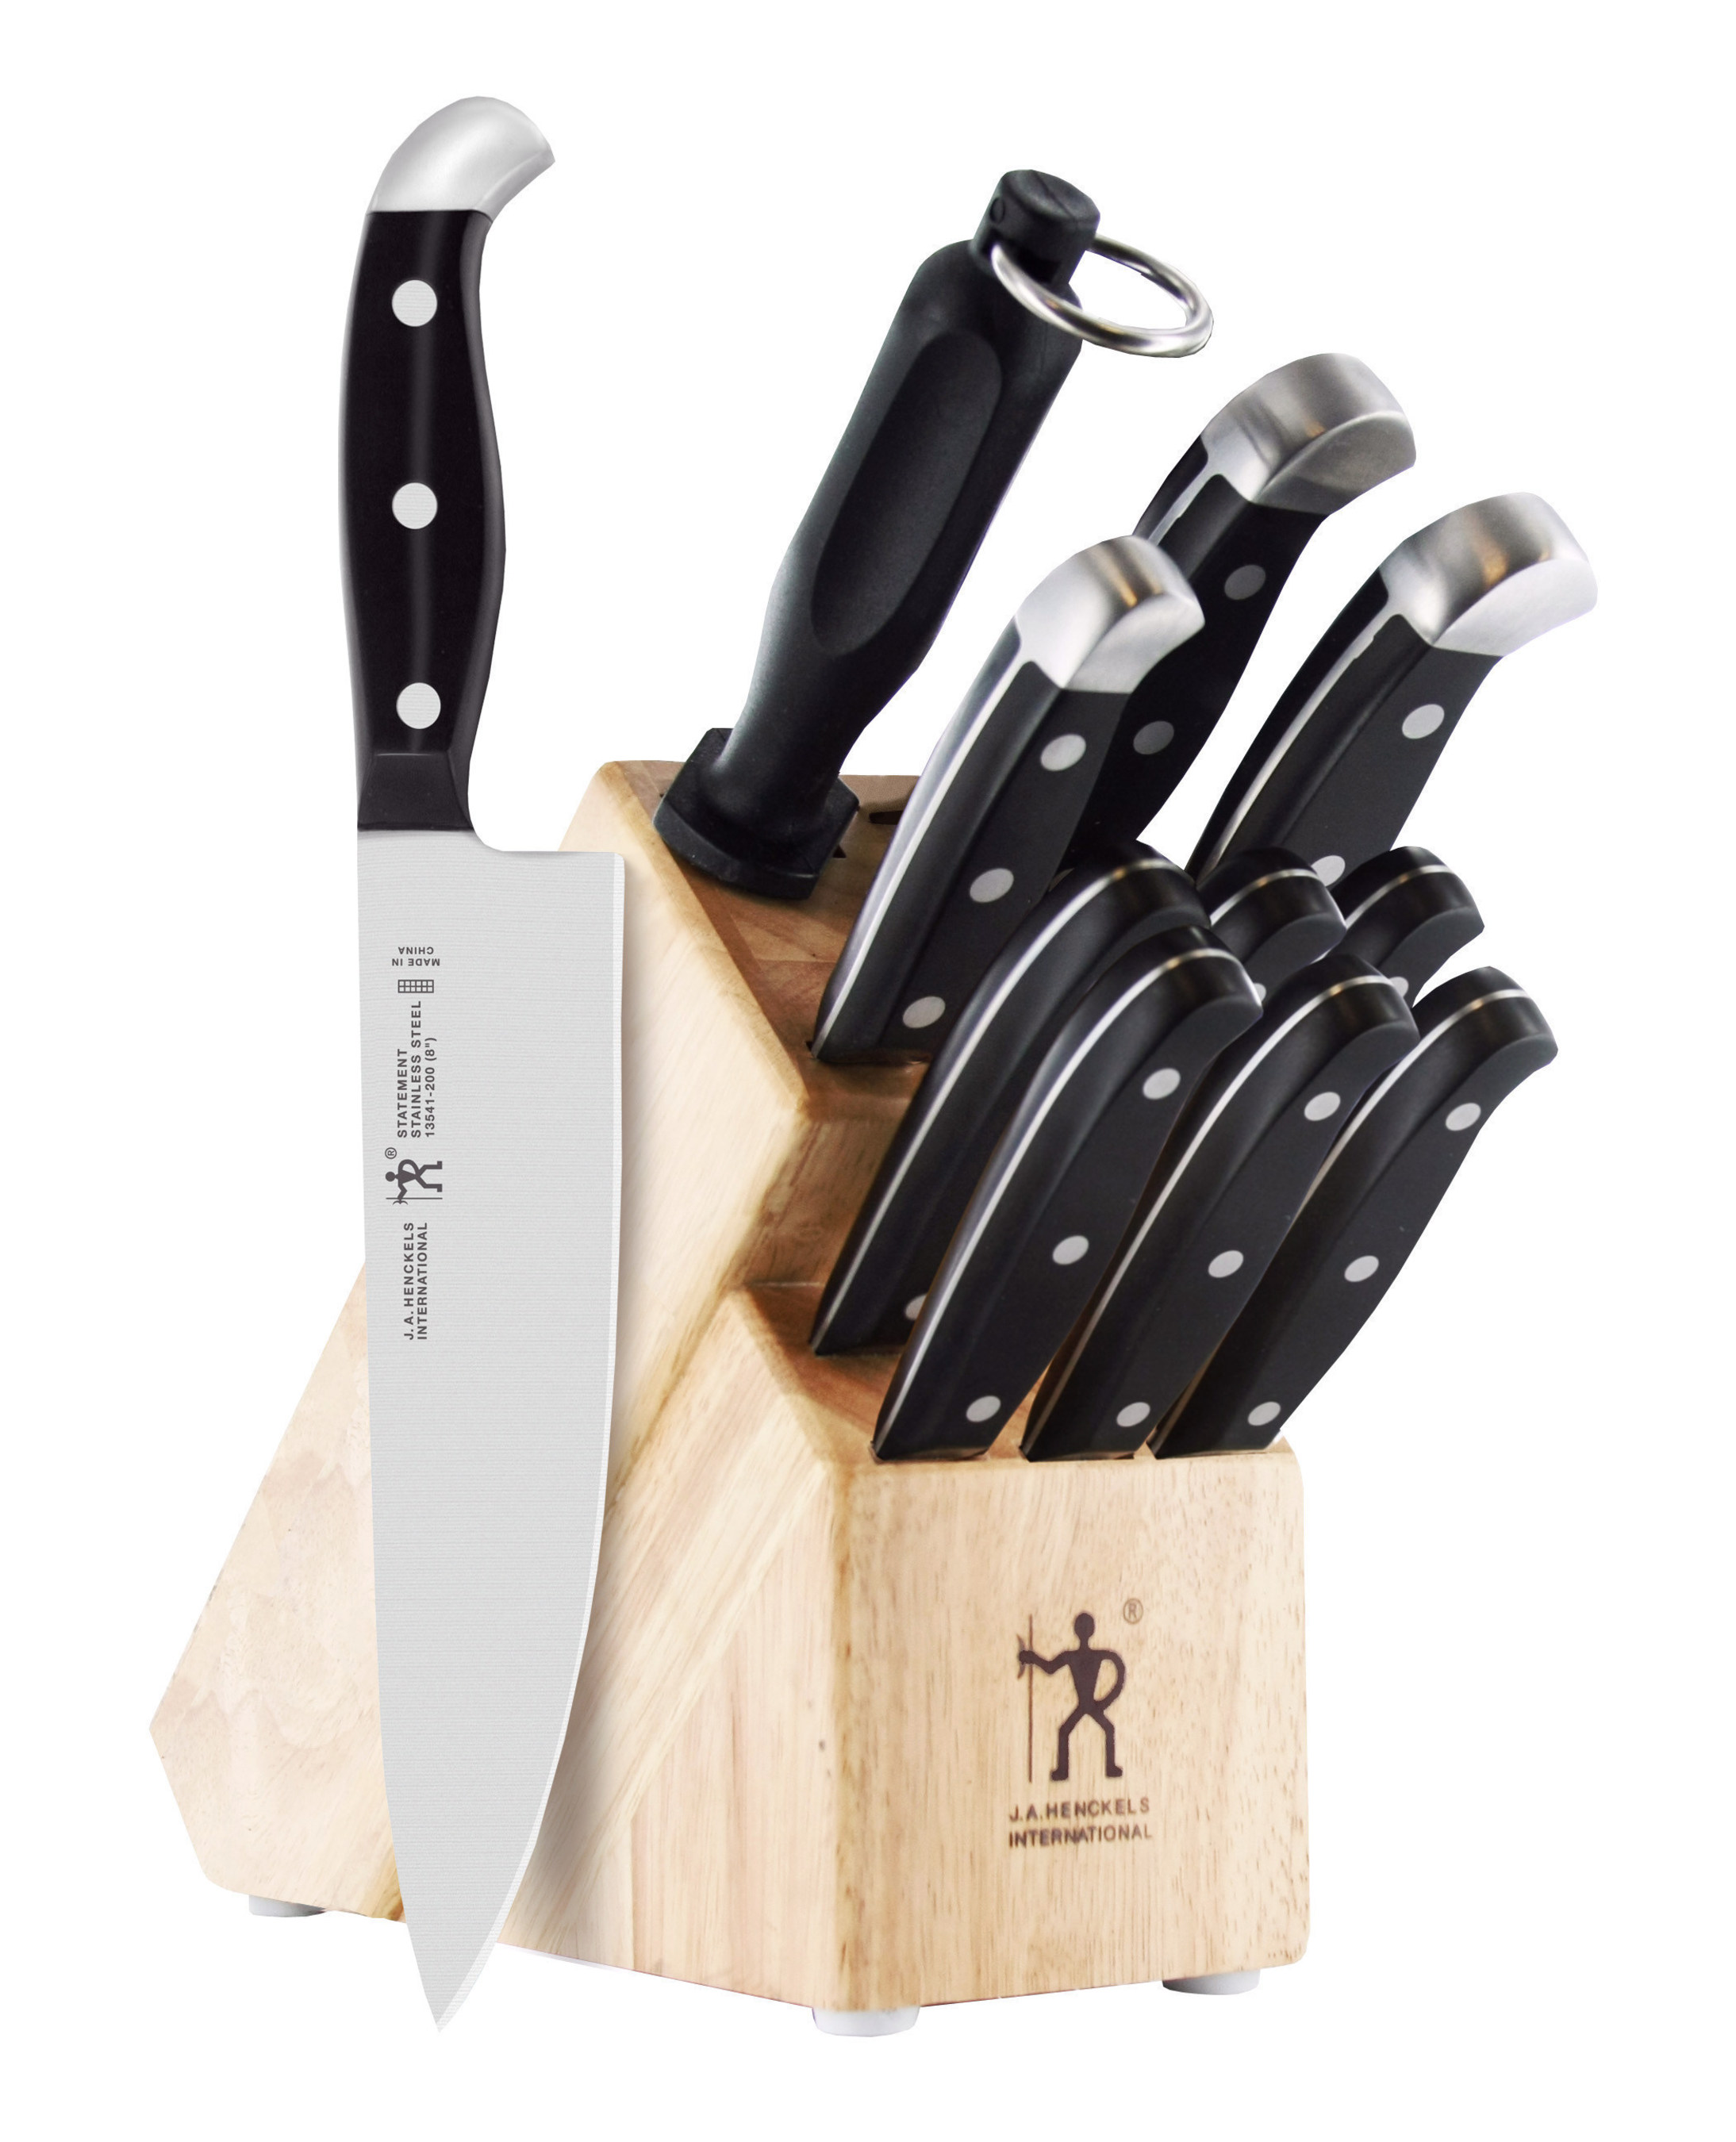 Something for the Cook: Any chef will tell you that having a great knife set is imperative in the kitchen - especially for all of the chopping, dicing and slicing that Mom-quality recipes require. If Mom's knife block needs some sprucing up, get her the 12-piece Henckels Knife Block priced at $119.99.